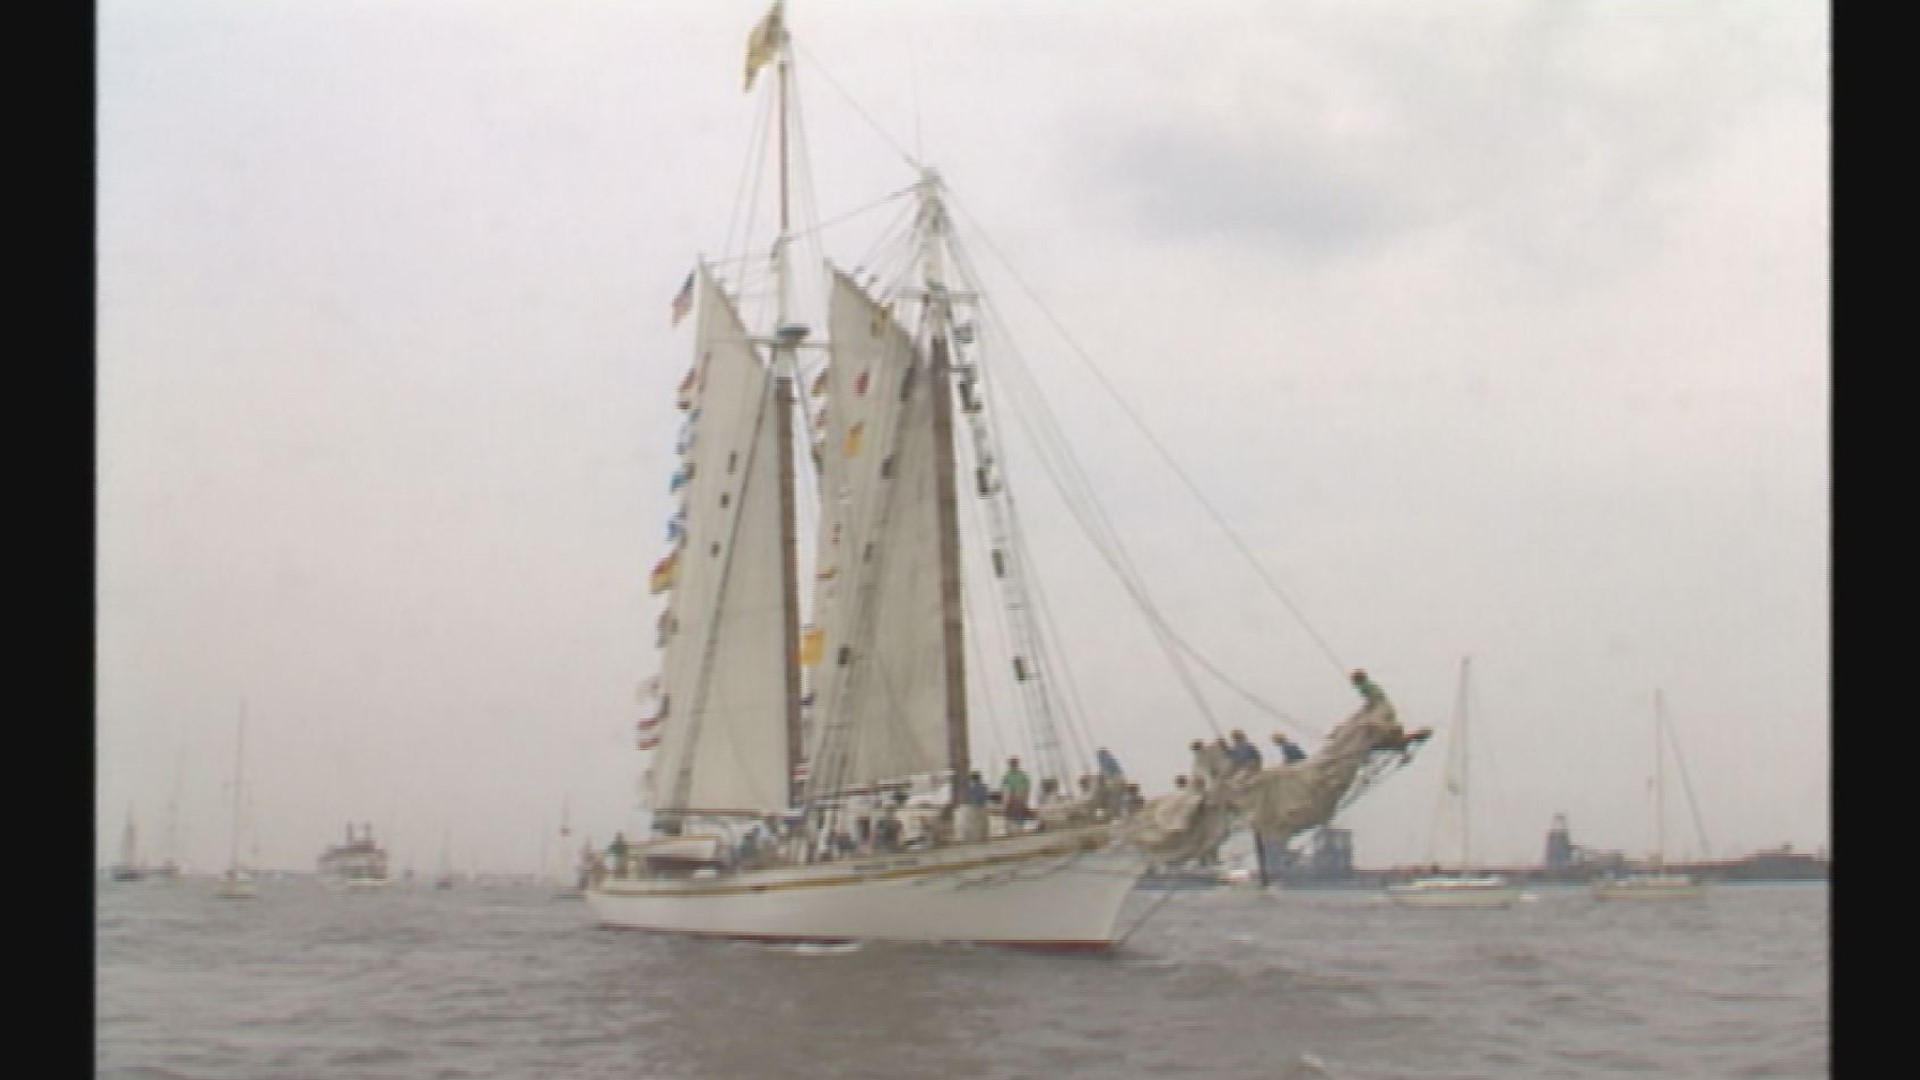 From the 13News Now archives: The Parade of Sail has long been a tradition of Harborfest, as you can see in this story from Harborfest '85. Originally aired on June 7, 1985.